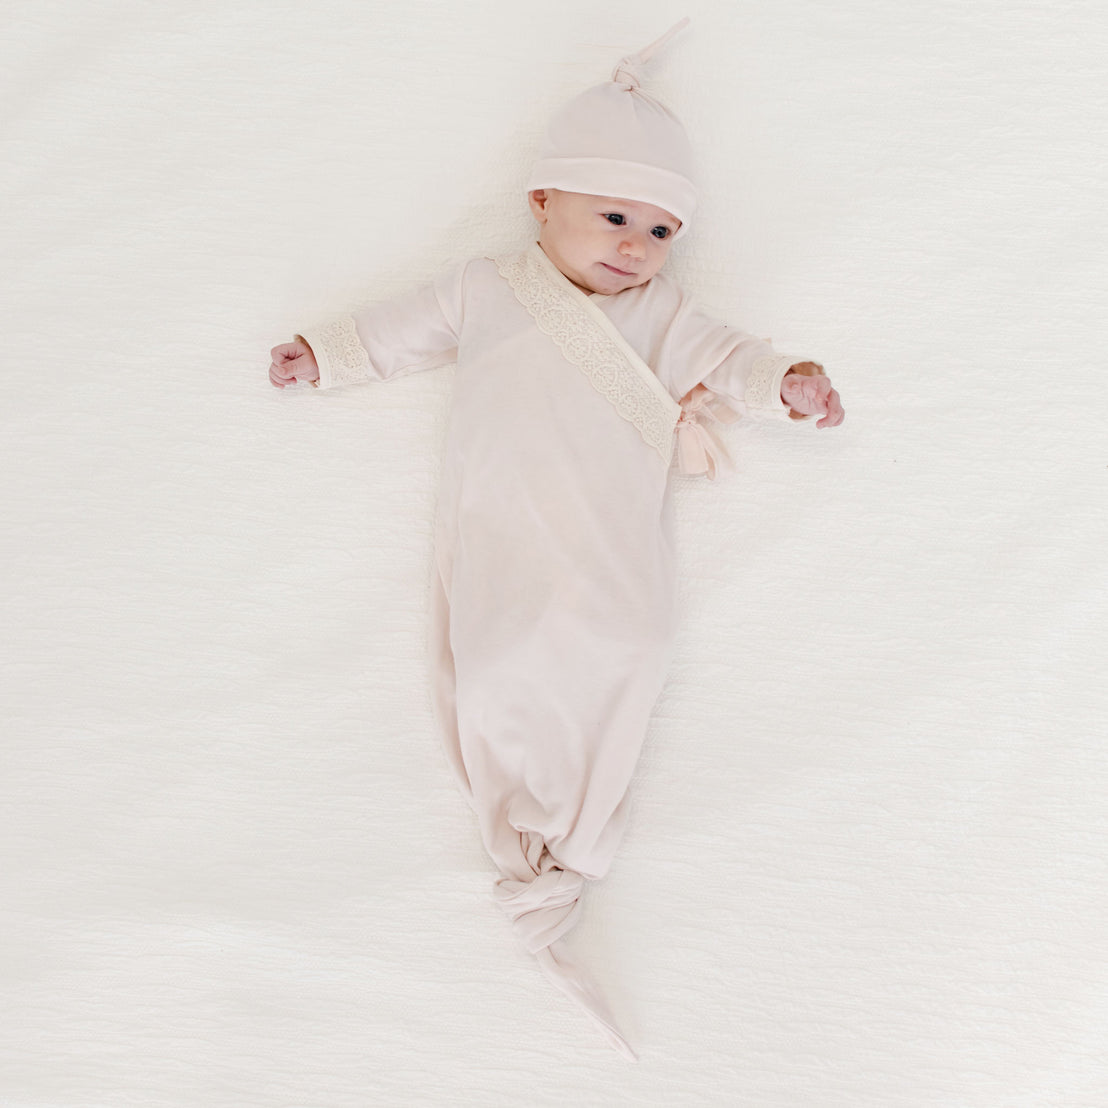 A newborn dressed in an Evelyn Knot Gown with the matching Ava Pima Knot Cap lies comfortably on a soft white blanket.